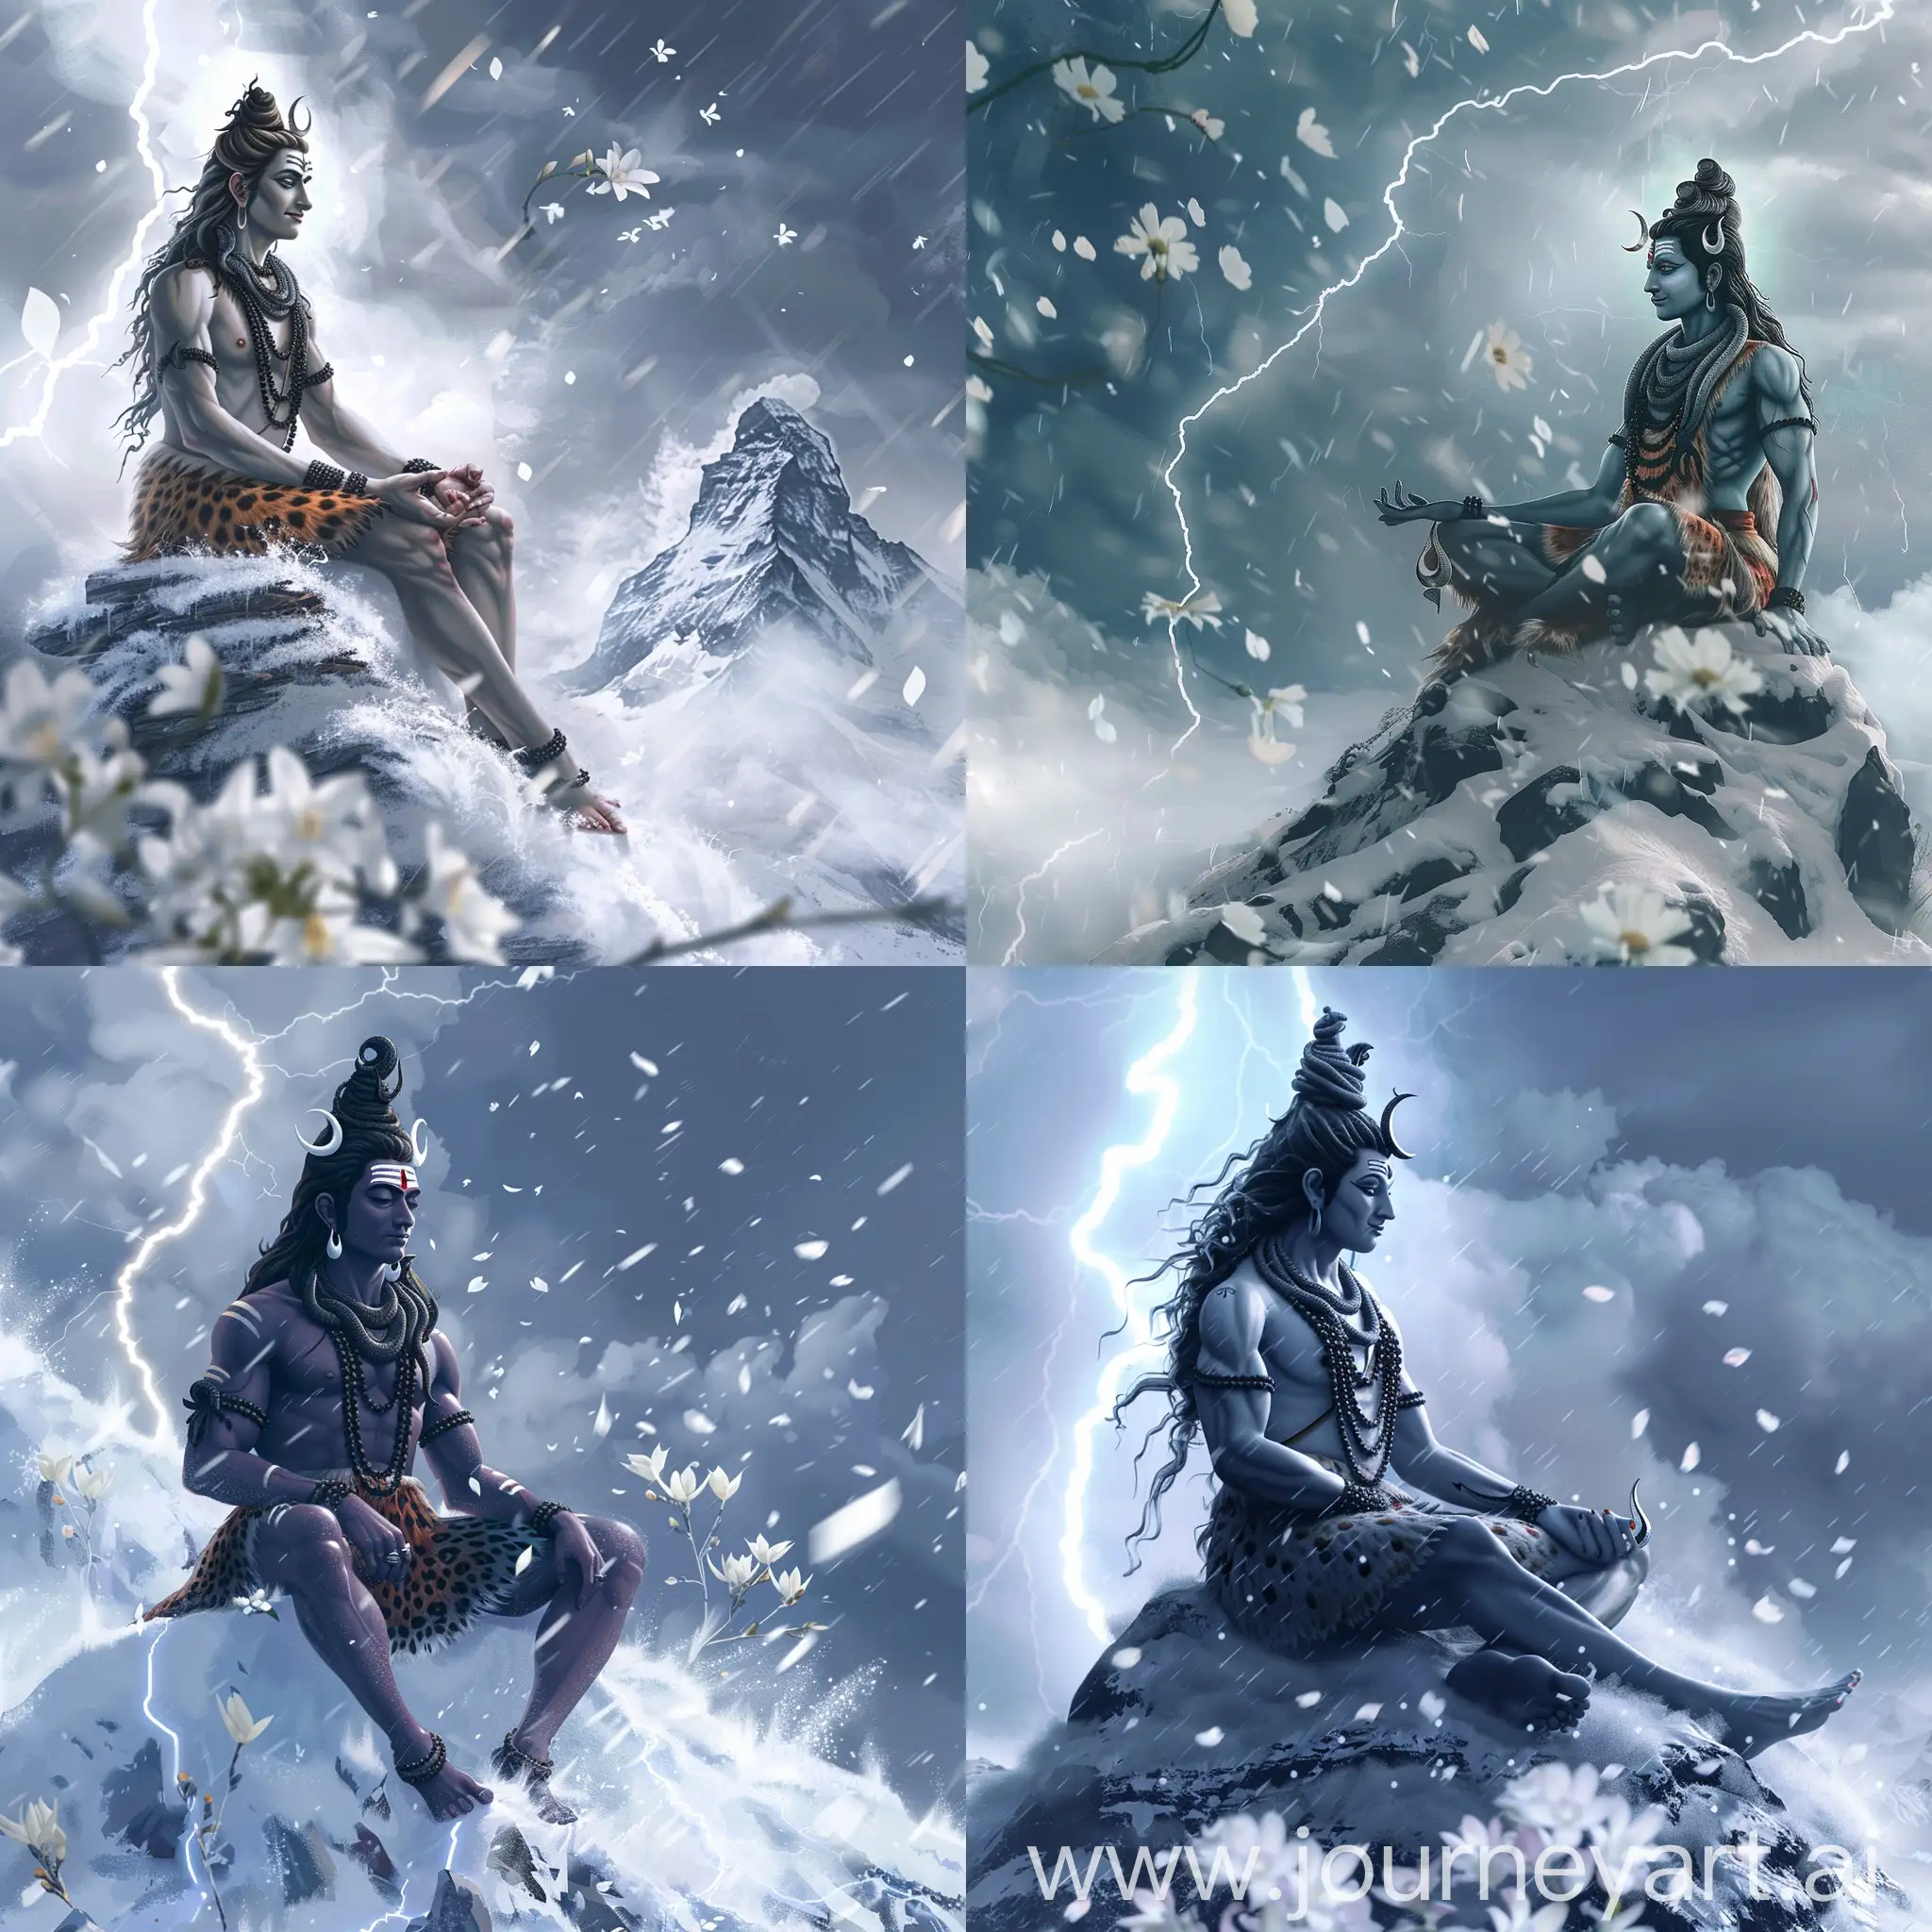 Lord shiv sitting on a high snow mountain, lightning, white flowers dropping in the background, scary, cinematic